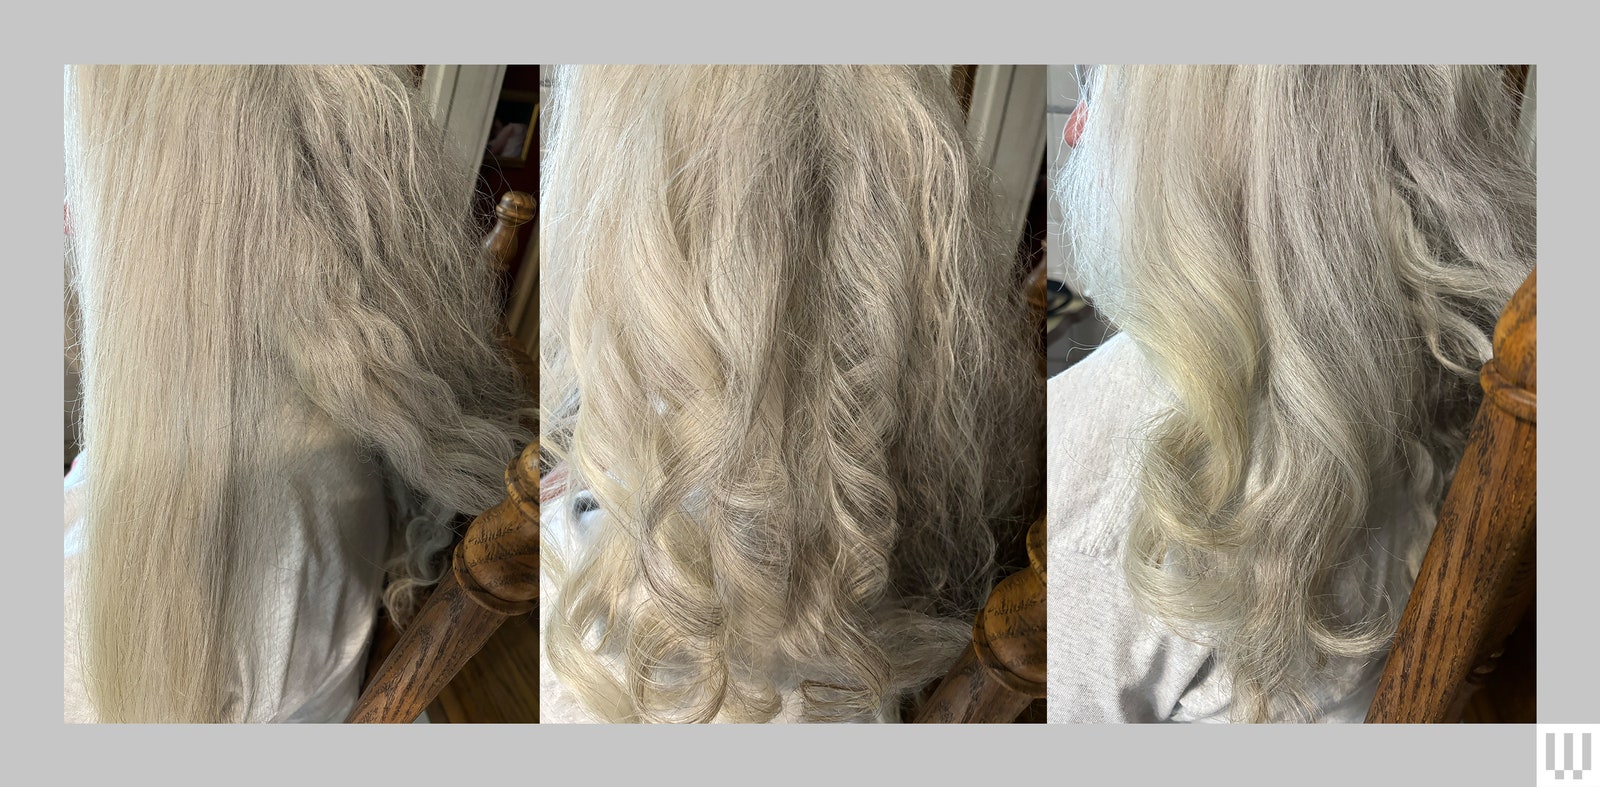 Person with white hair getting their hair styled. Left to right hair brushed hair curled and the curls brushed out.